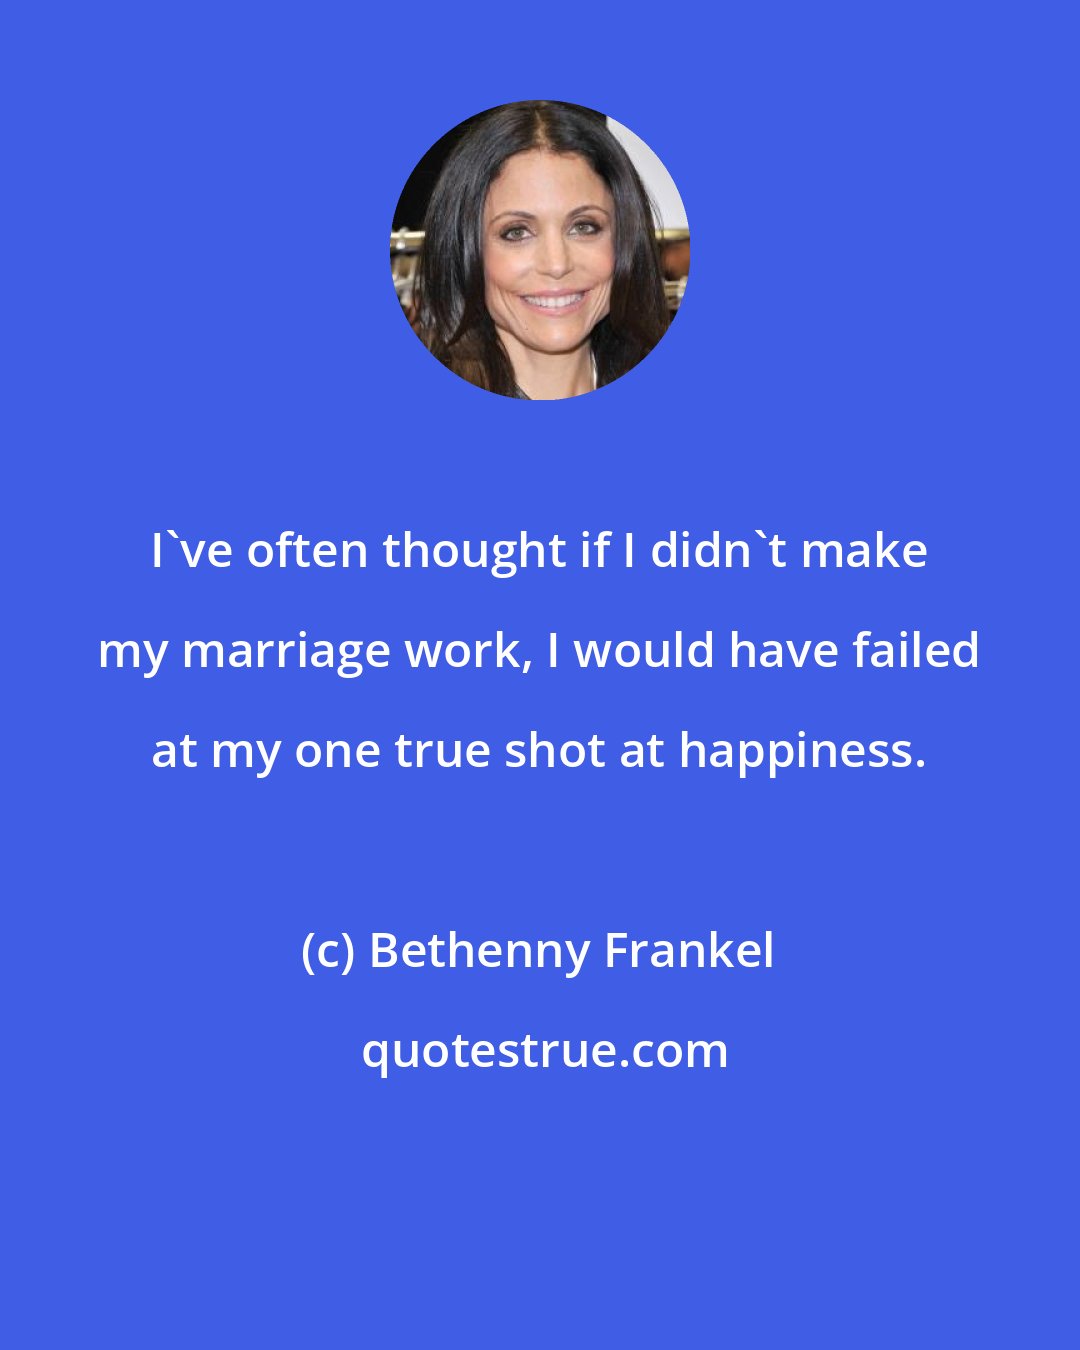 Bethenny Frankel: I've often thought if I didn't make my marriage work, I would have failed at my one true shot at happiness.